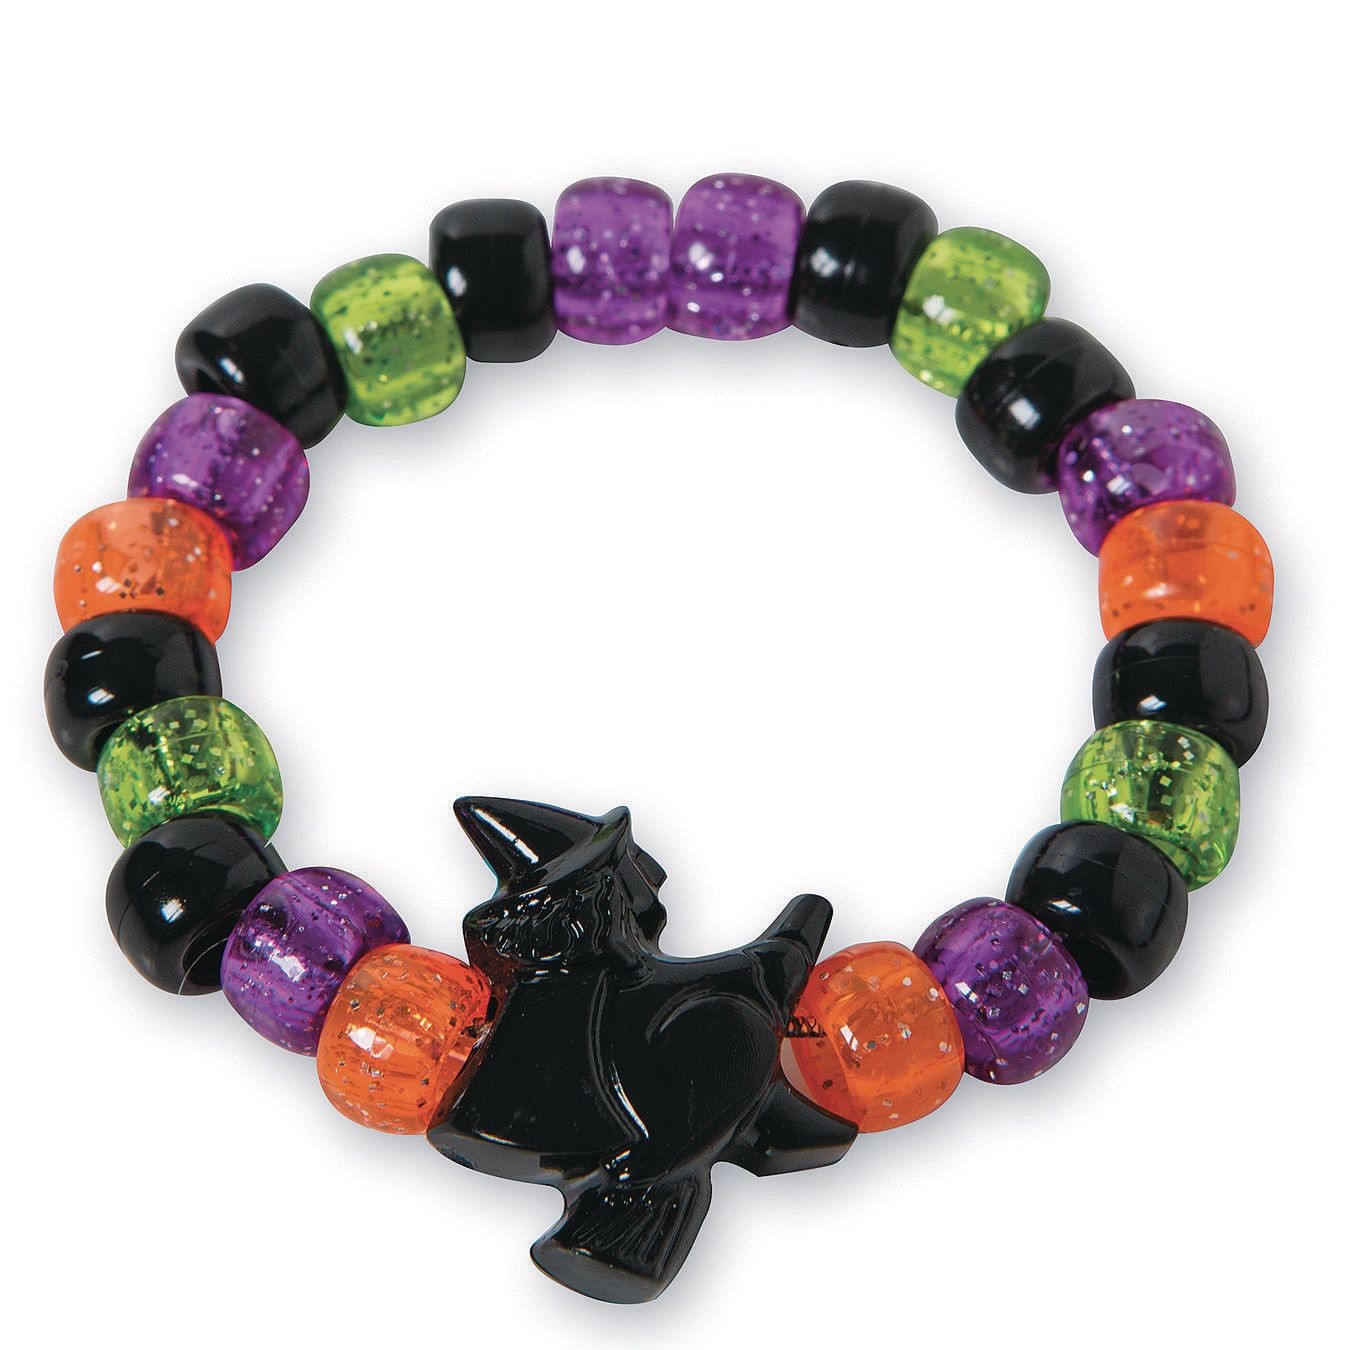 BEST WITCHES Beaded Friendship Bracelets